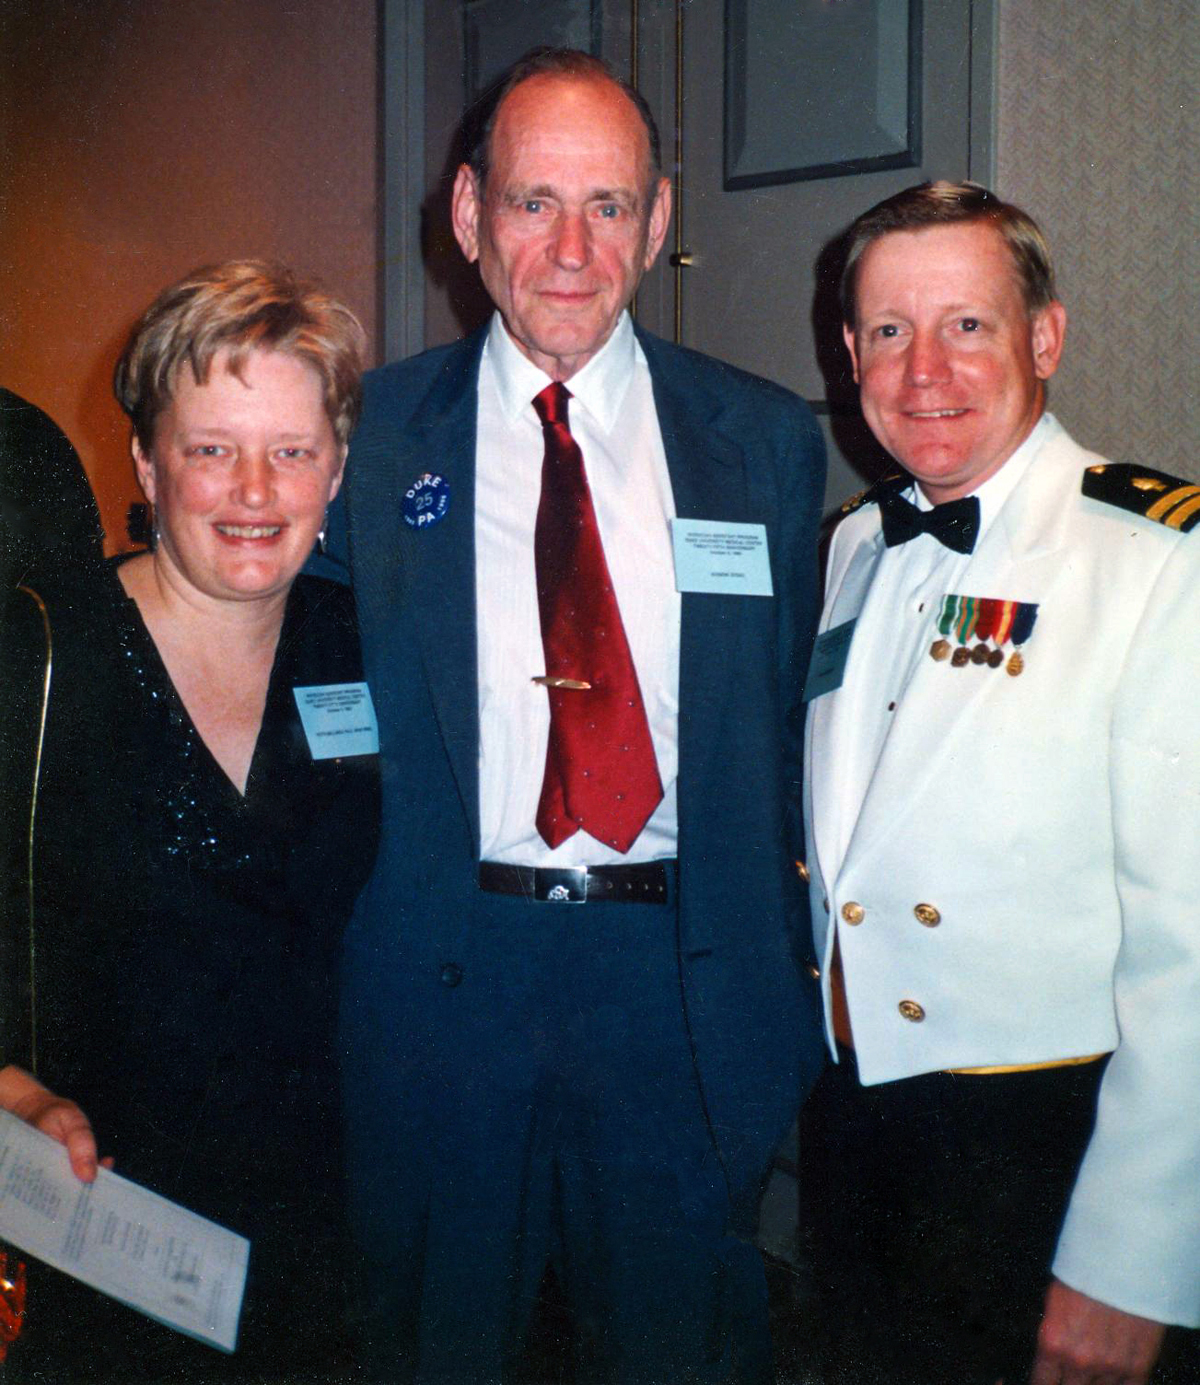 Ruth, Eugene Stead and the Chief Navy PA at the Duke program's 25th anniversary.